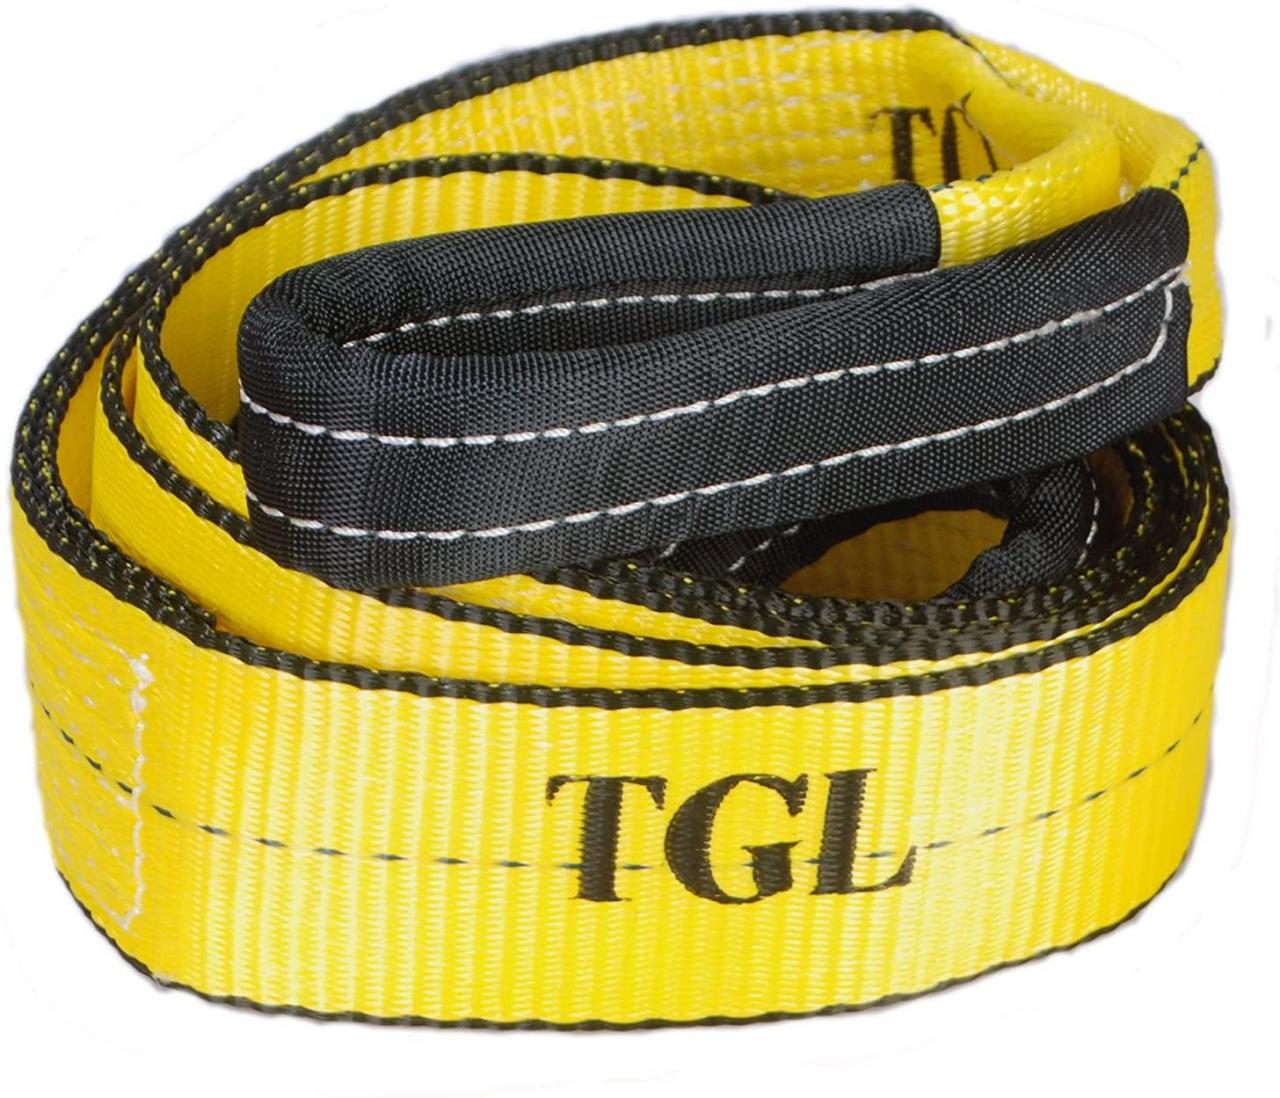 Buy TGL 3 inch, 8 Foot Tree Saver, Winch Strap, Tow Strap 30,000 Pound  Capacity Online in Hong Kong. B00Z8R7T3Q